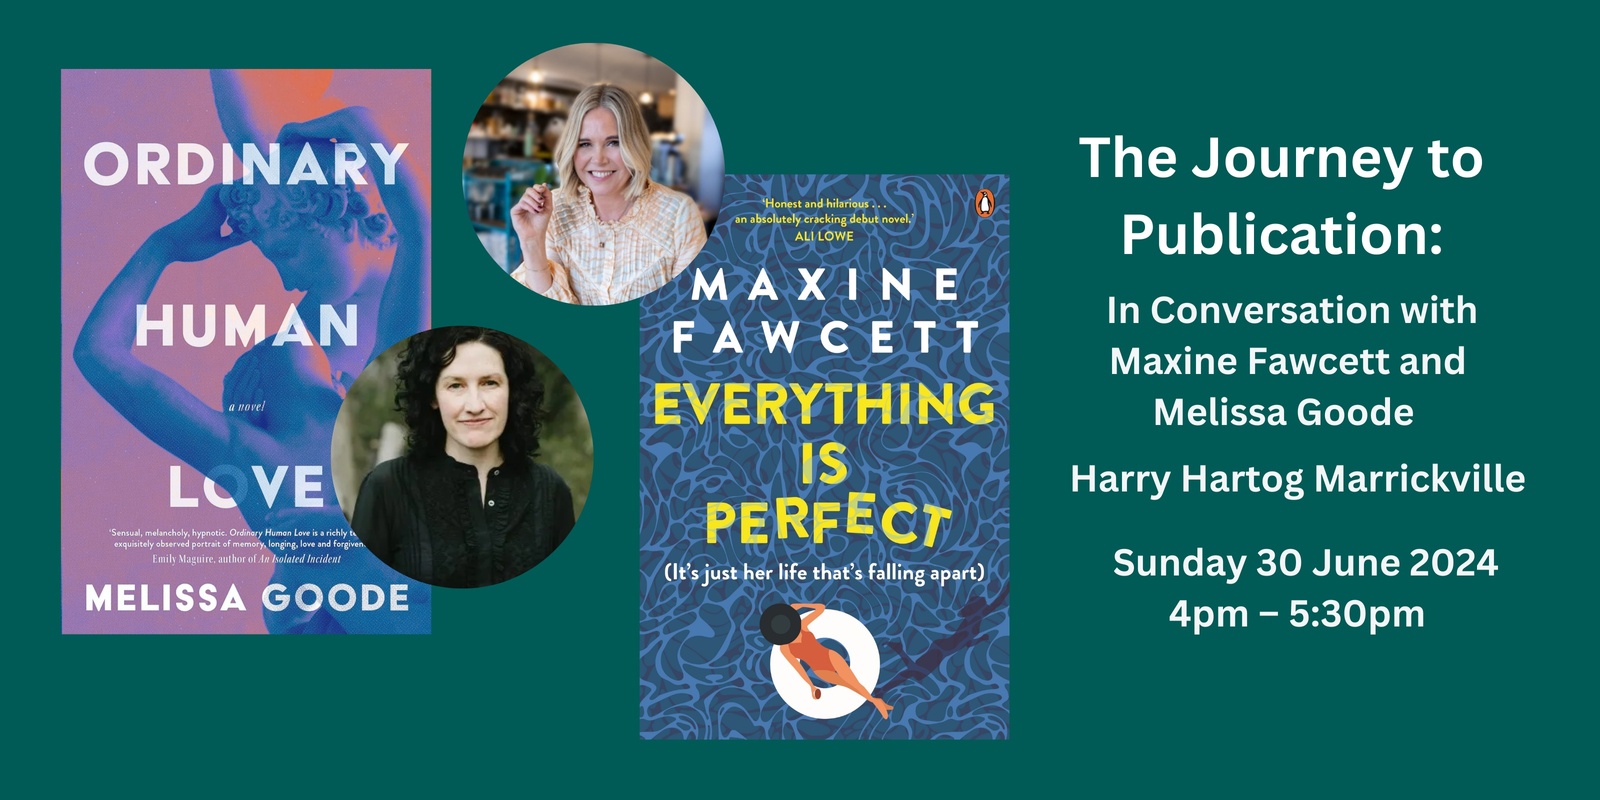 Banner image for The Journey to Publication: In Conversation with Maxine Fawcett and Melissa Goode 